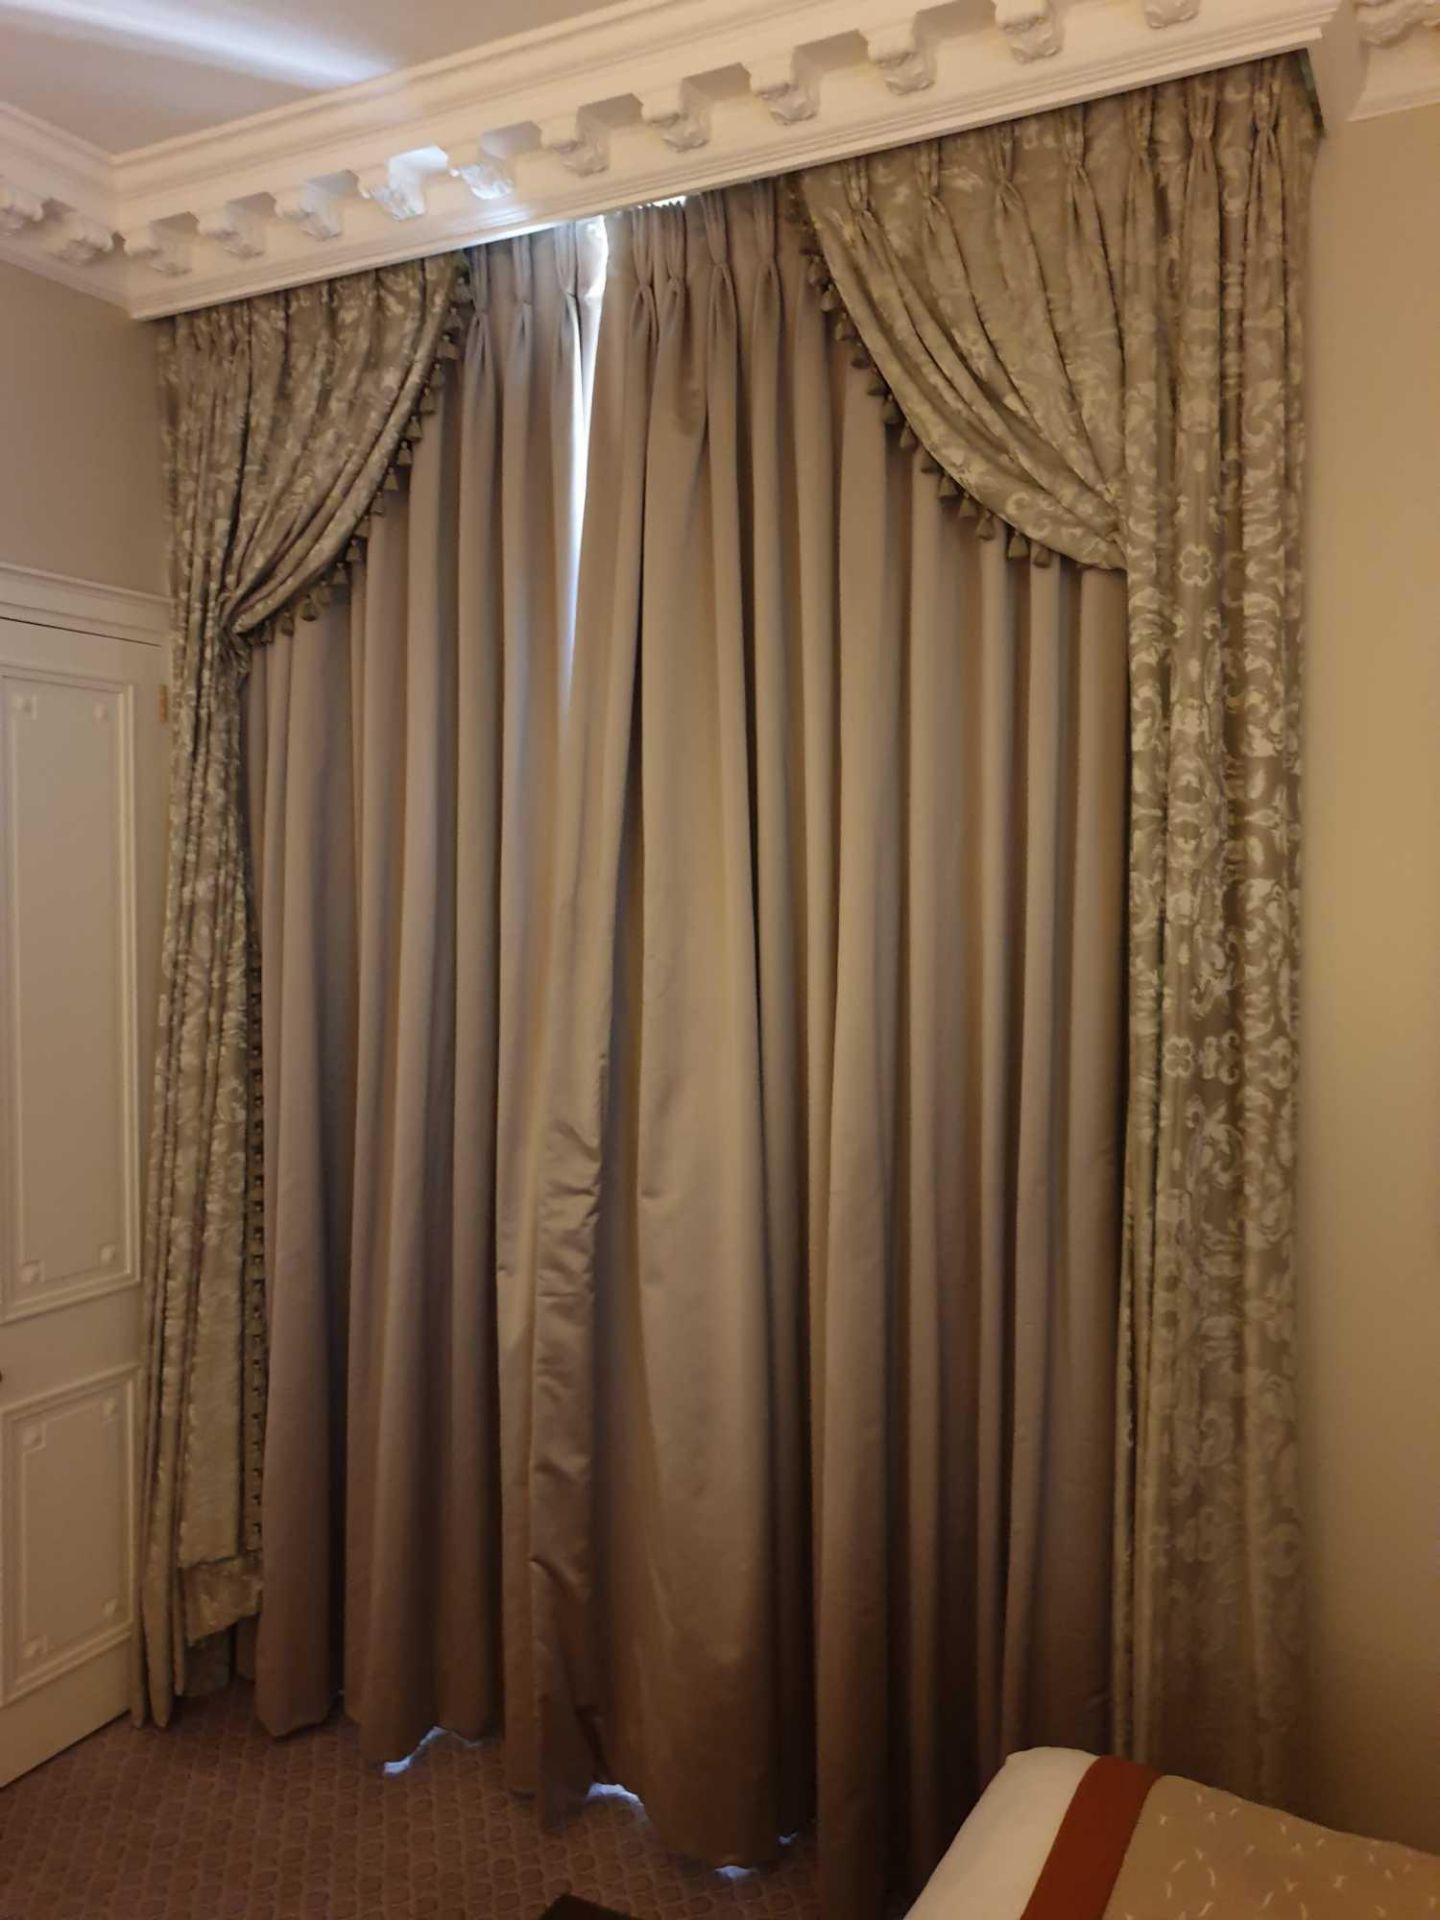 A Pair Of Silk Drapes And Jabots Fully Lined Curtains In Dark Textured Grey 230 x 290cm (Room